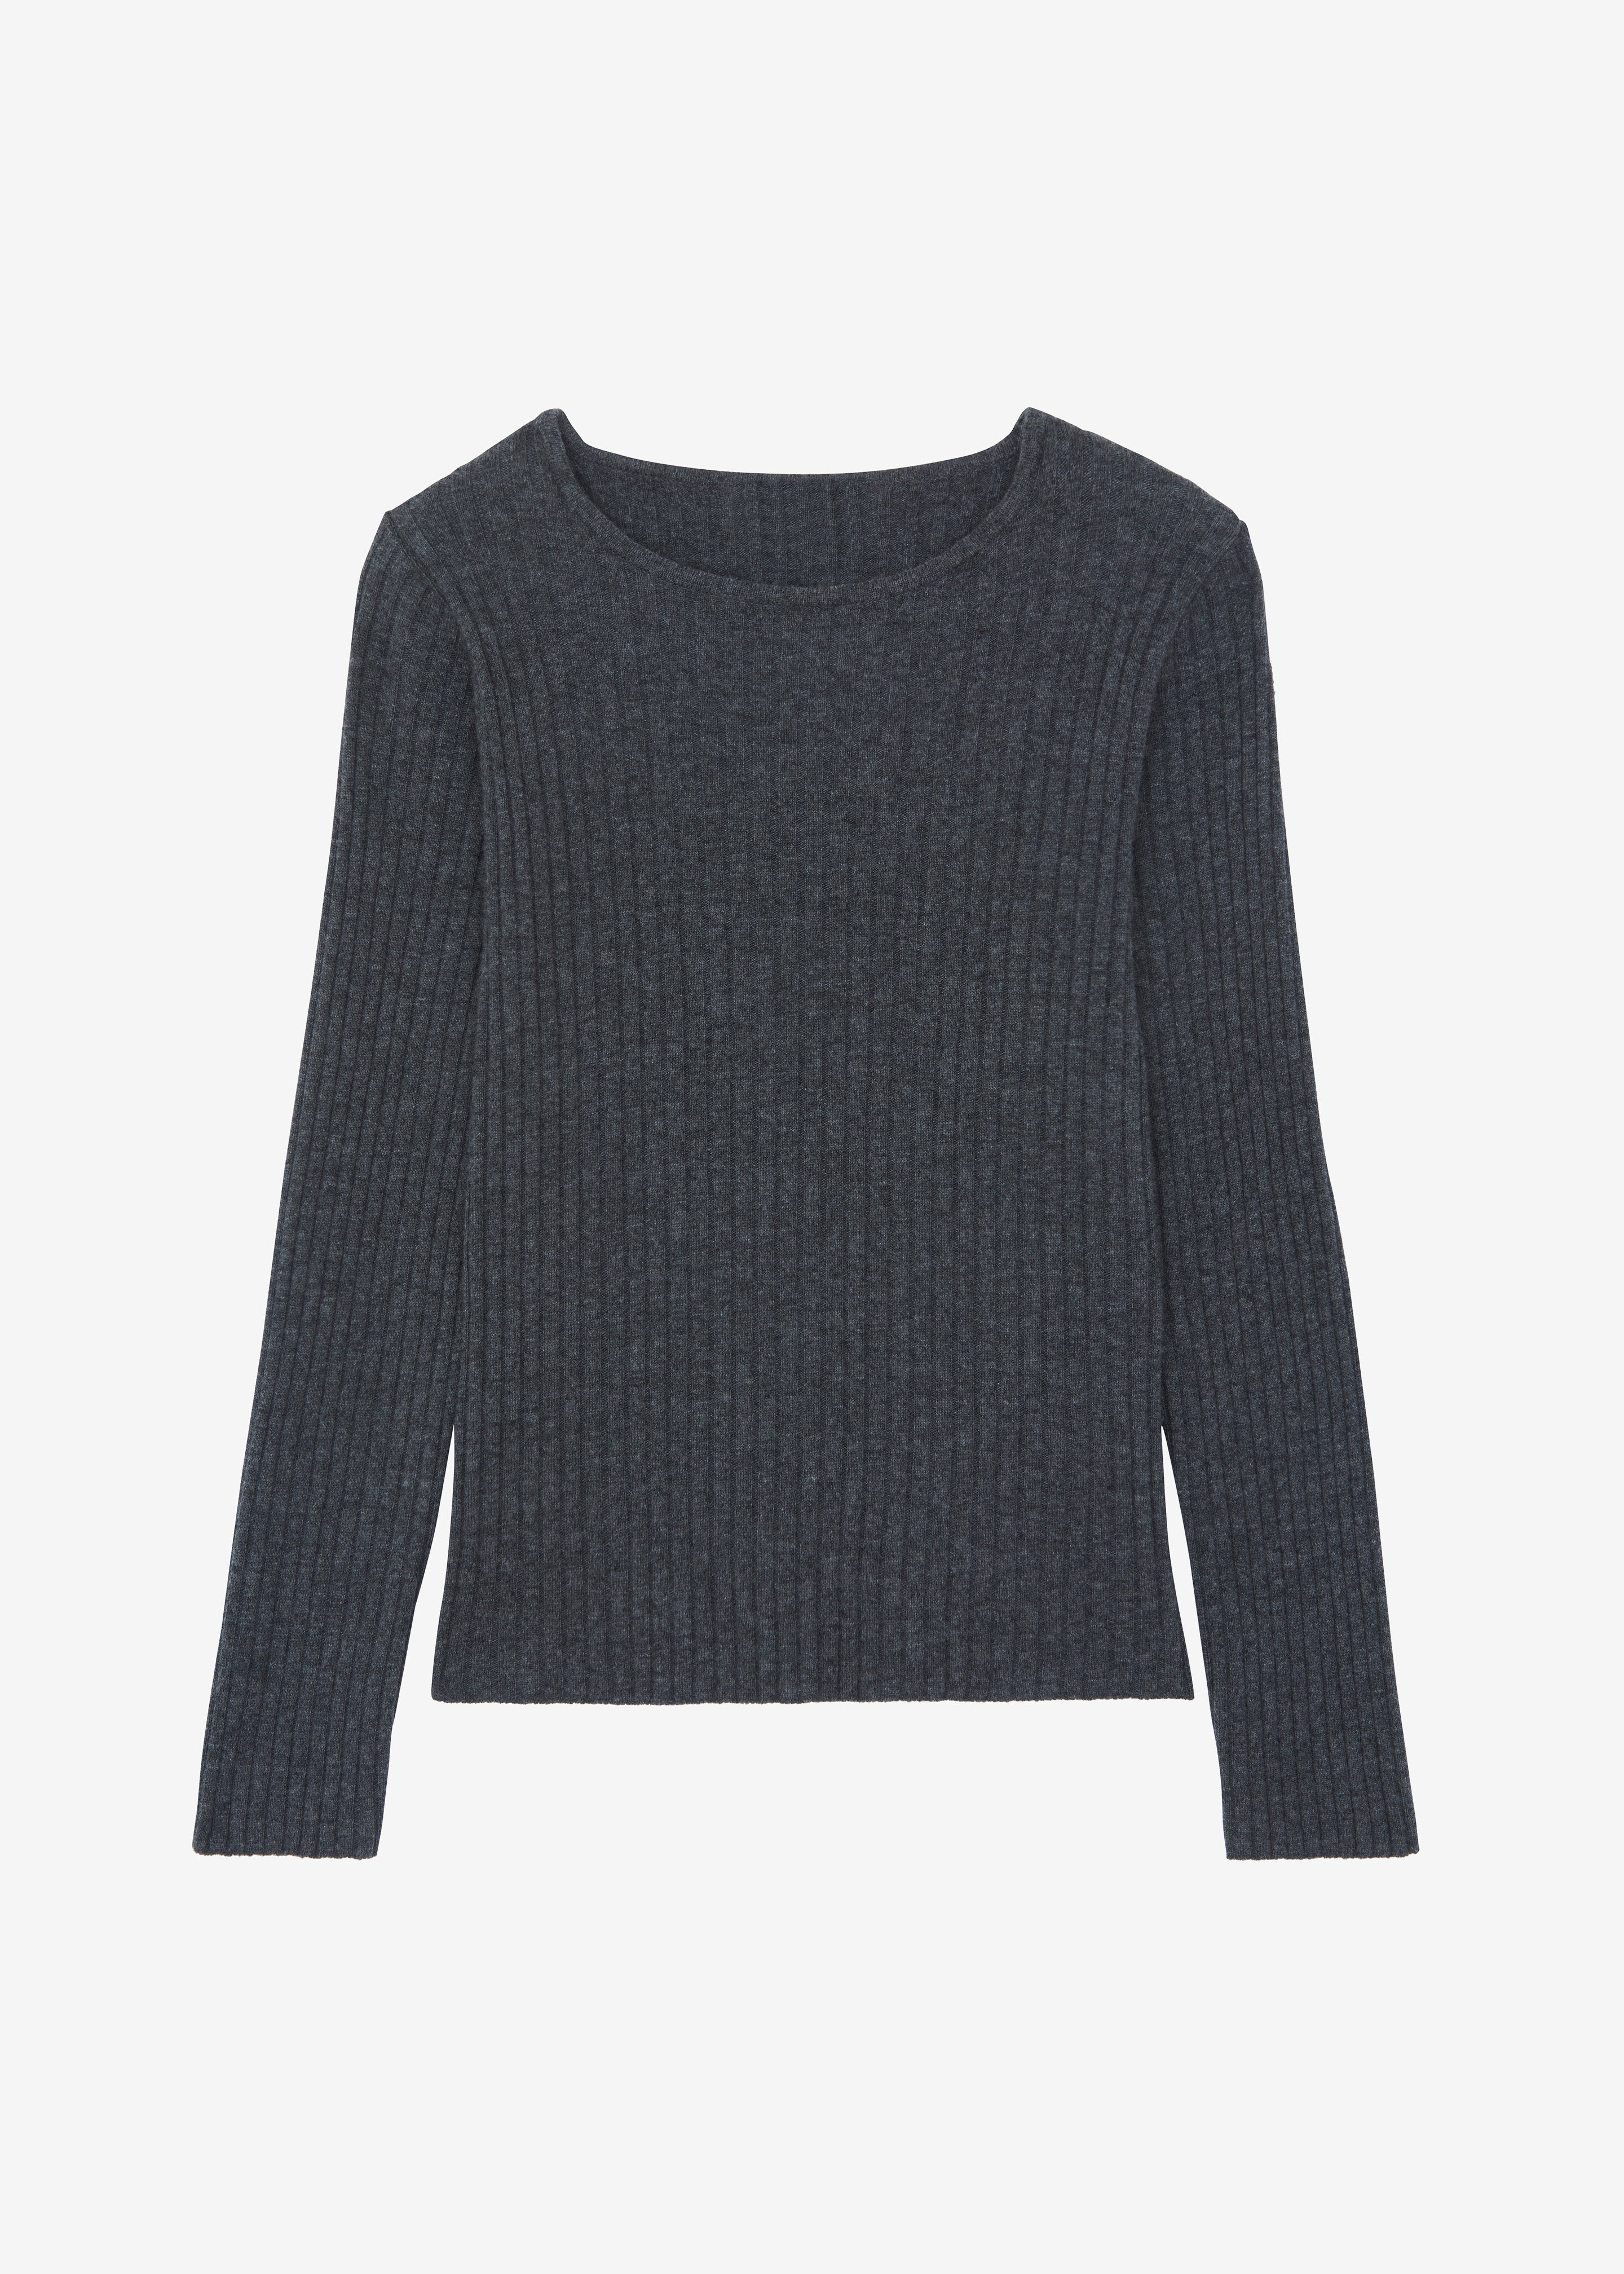 Cora Ribbed Sweater - Charcoal - 8